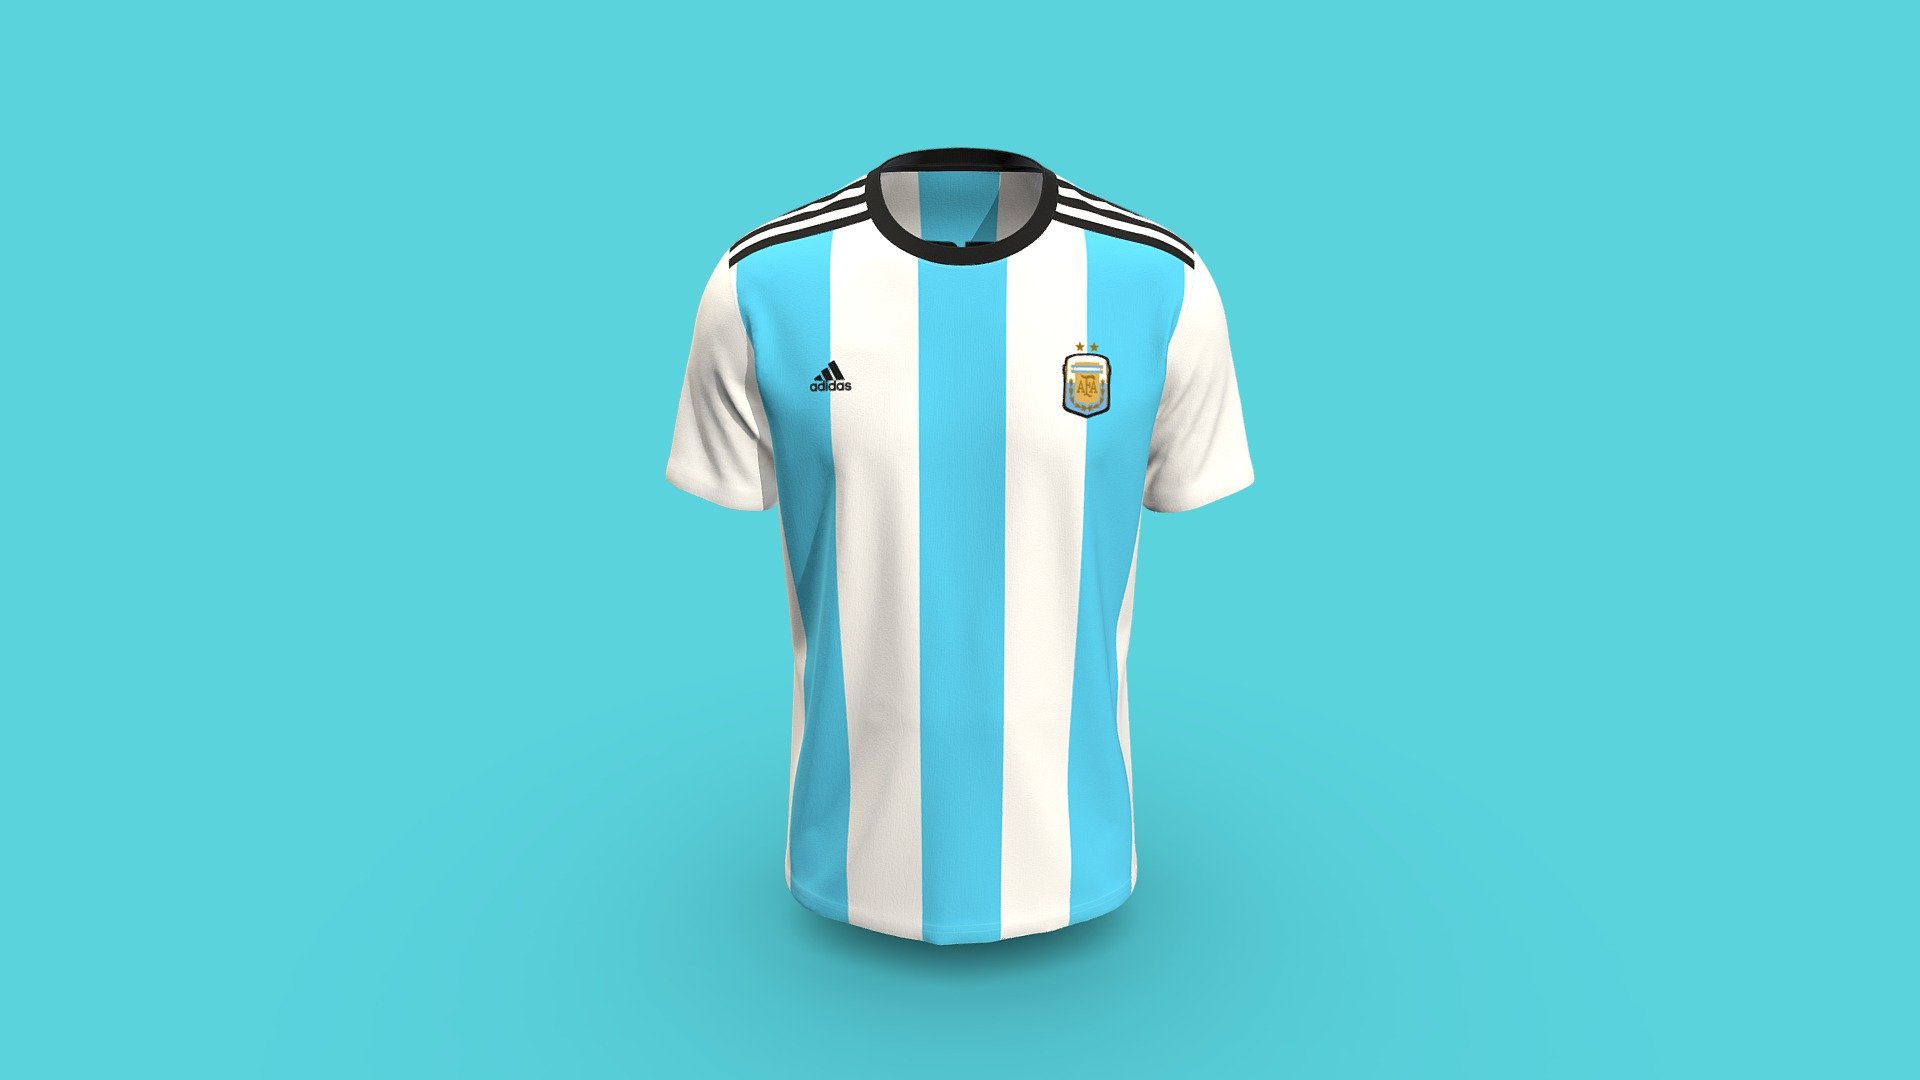 Cloth Title = Men's Replica Adidas Messi Argentina Jersey

SKU = DG100044 

Category = Unisex 

Product Type = T-Shirt 

Cloth Length = Regular 

Body Fit = Loose Fit 

Occasion = Casual  

Sleeve Style = Set In Sleeve


Our Services:

3D Apparel Design.

OBJ,FBX,GLTF Making with High/Low Poly.

Fabric Digitalization.

Mockup making.

3D Teck Pack.

Pattern Making.

2D Illustration.

Cloth Animation and 360 Spin Video.


Contact us:- 

Email: info@digitalfashionwear.com 

Website: https://digitalfashionwear.com 


We designed all the types of cloth specially focused on product visualization, e-commerce, fitting, and production. 

We will design: 

T-shirts 

Polo shirts 

Hoodies 

Sweatshirt 

Jackets 

Shirts 

TankTops 

Trousers 

Bras 

Underwear 

Blazer 

Aprons 

Leggings 

and All Fashion items. 





Our goal is to make sure what we provide you, meets your demand 3d model